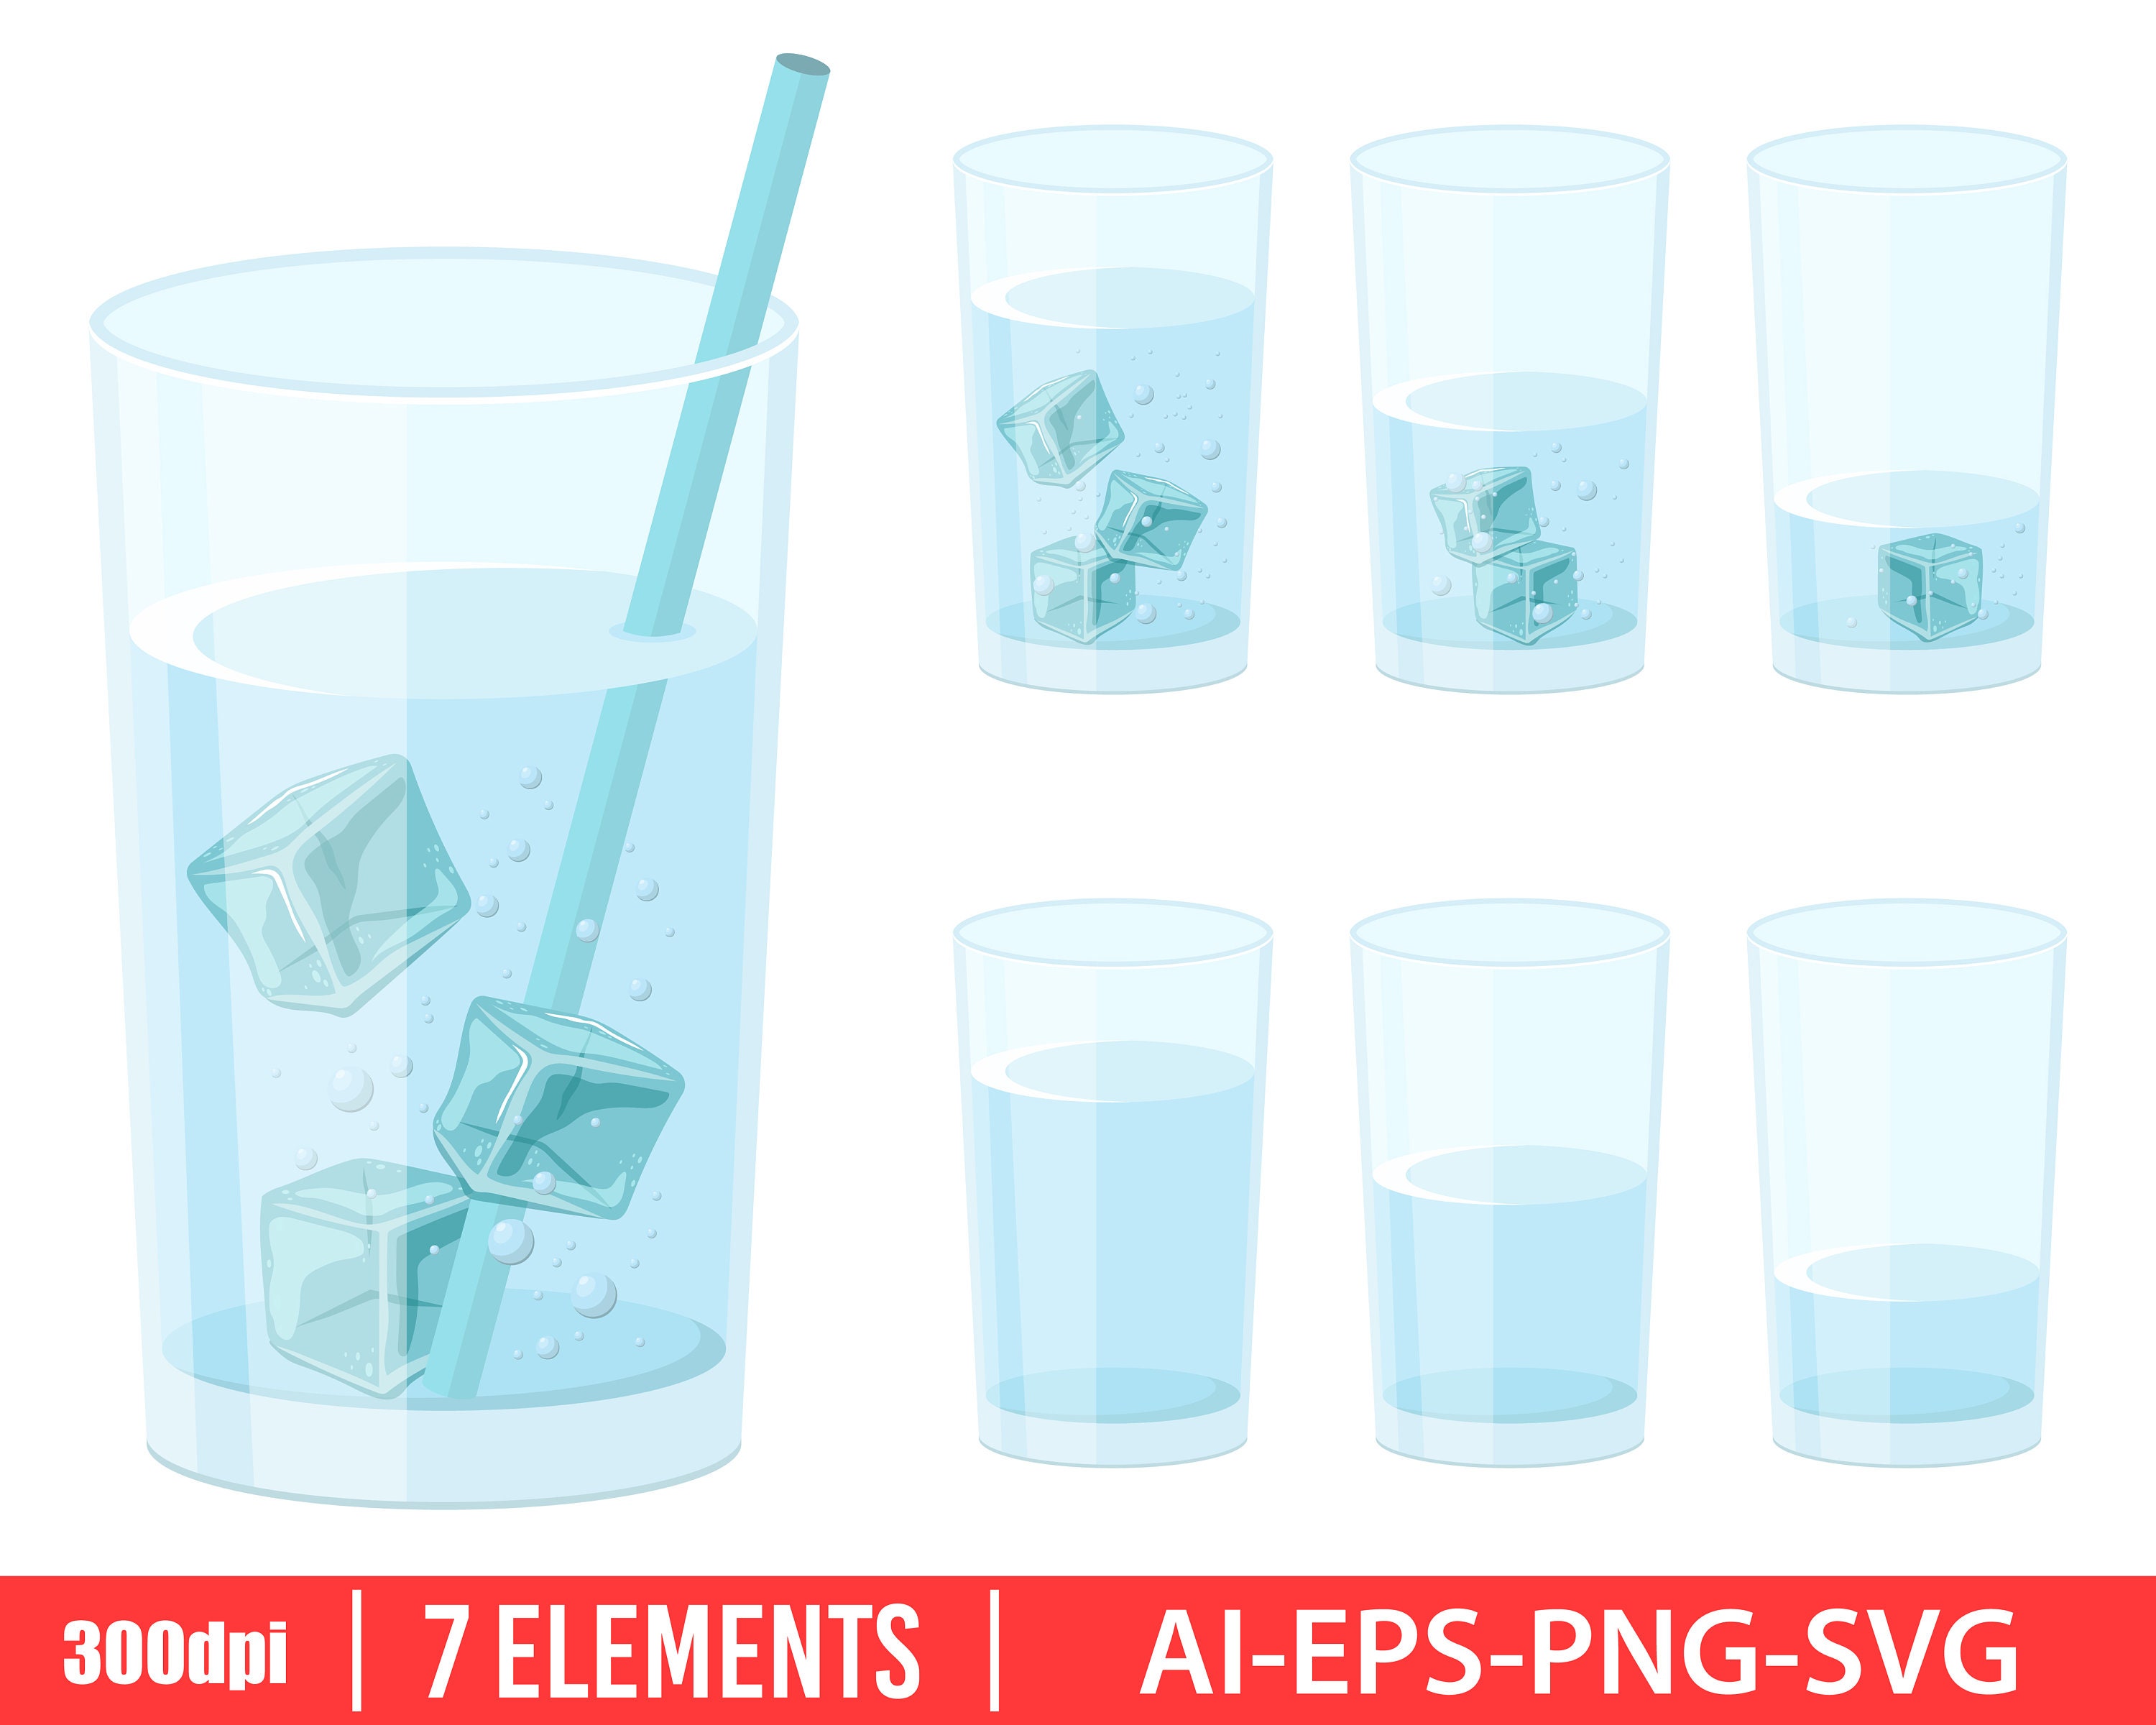 Clear Glass of Ice Water  ClipPix ETC: Educational Photos for